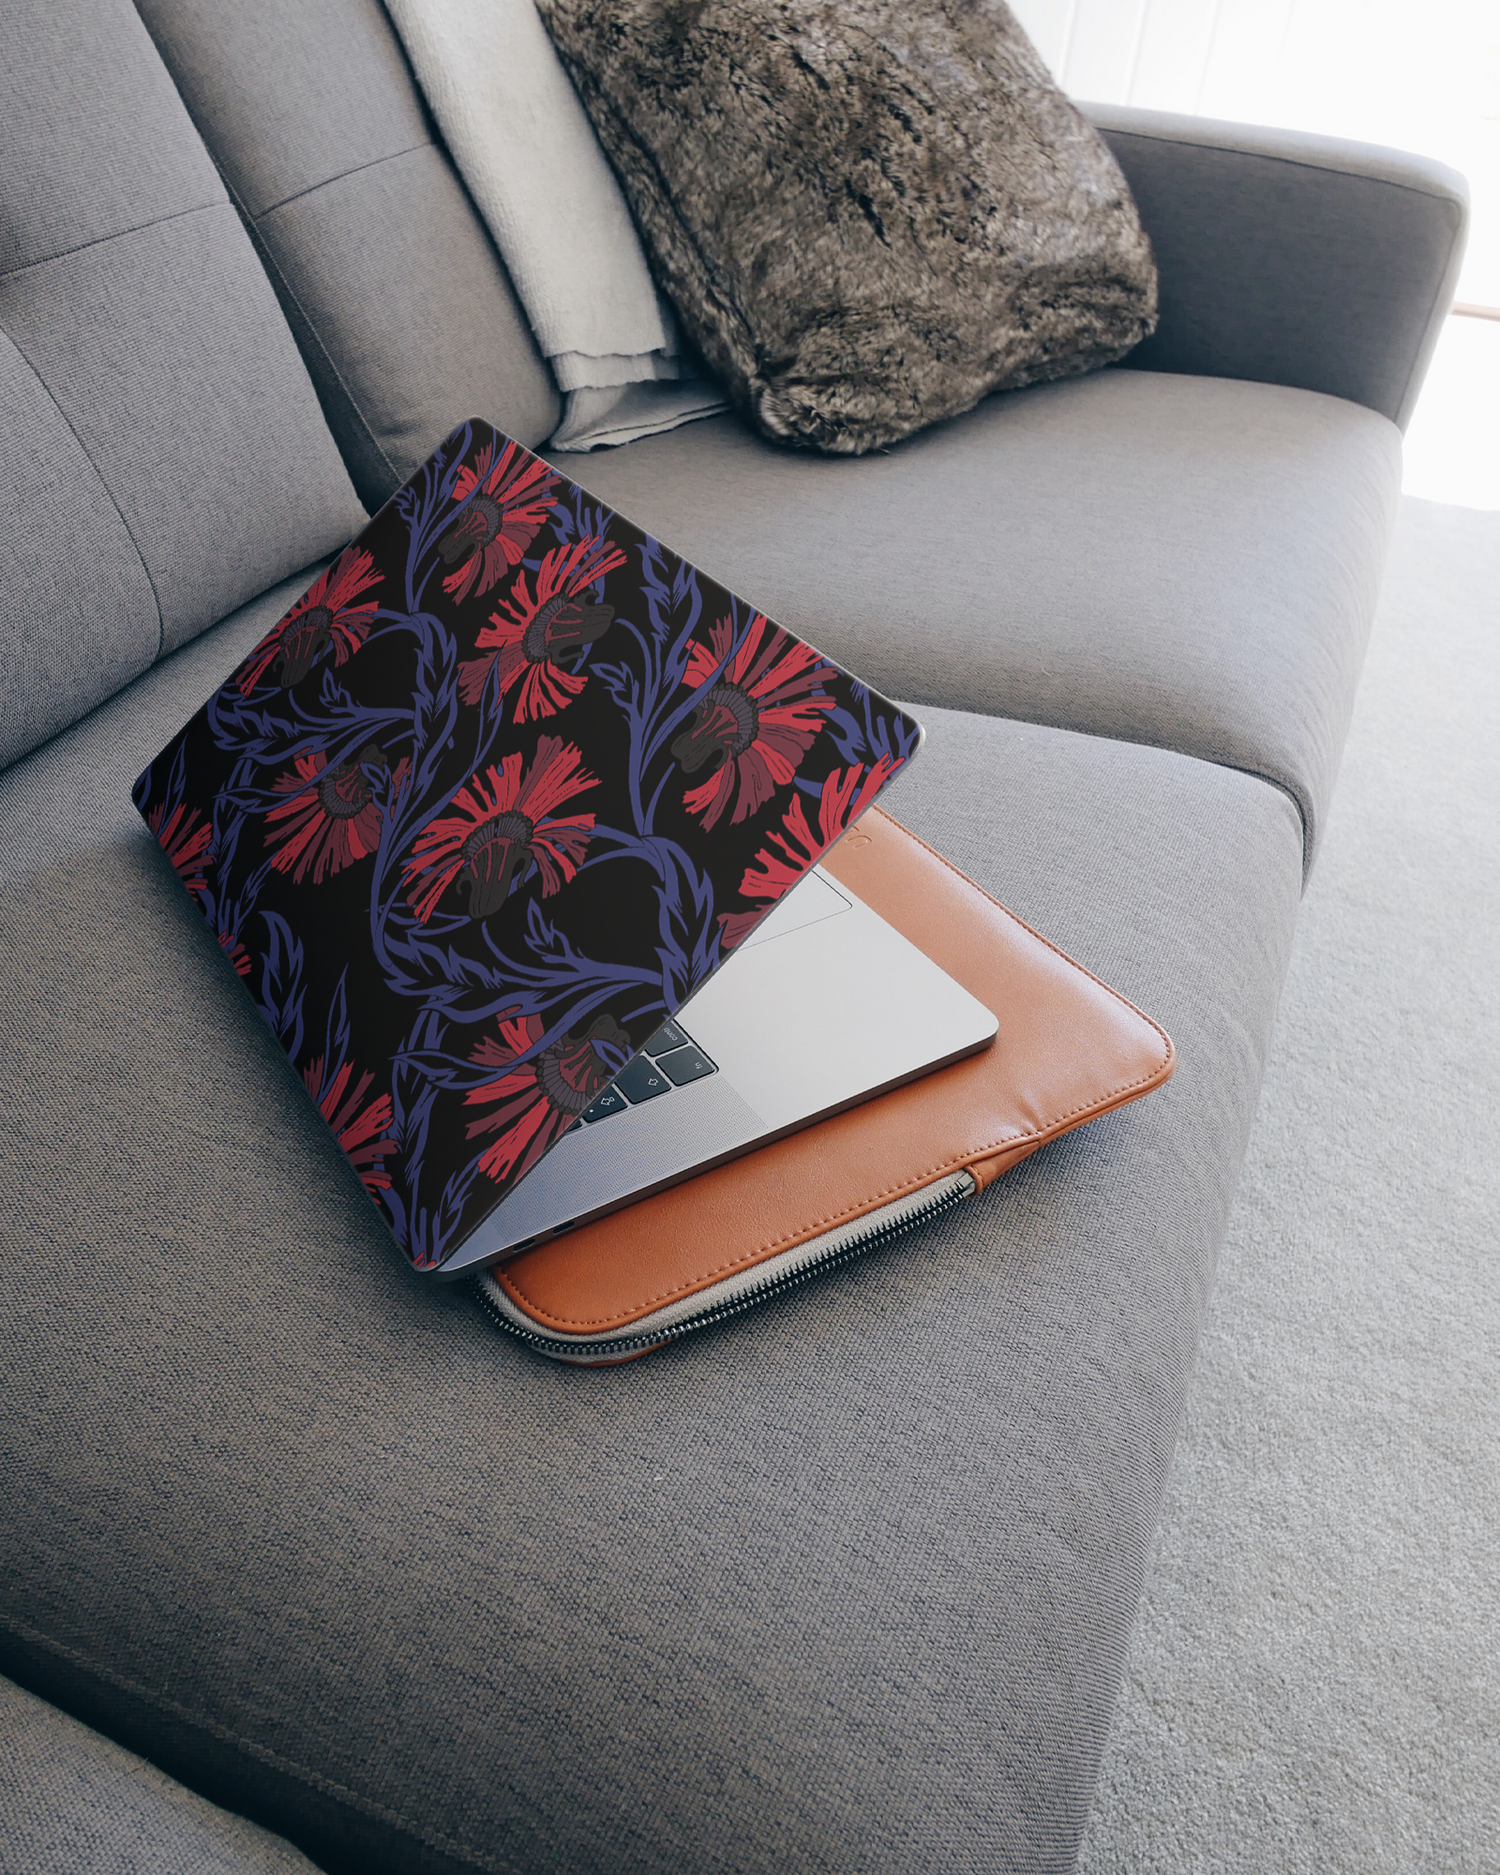 Midnight Floral Laptop Skin for 15 inch Apple MacBooks on a couch